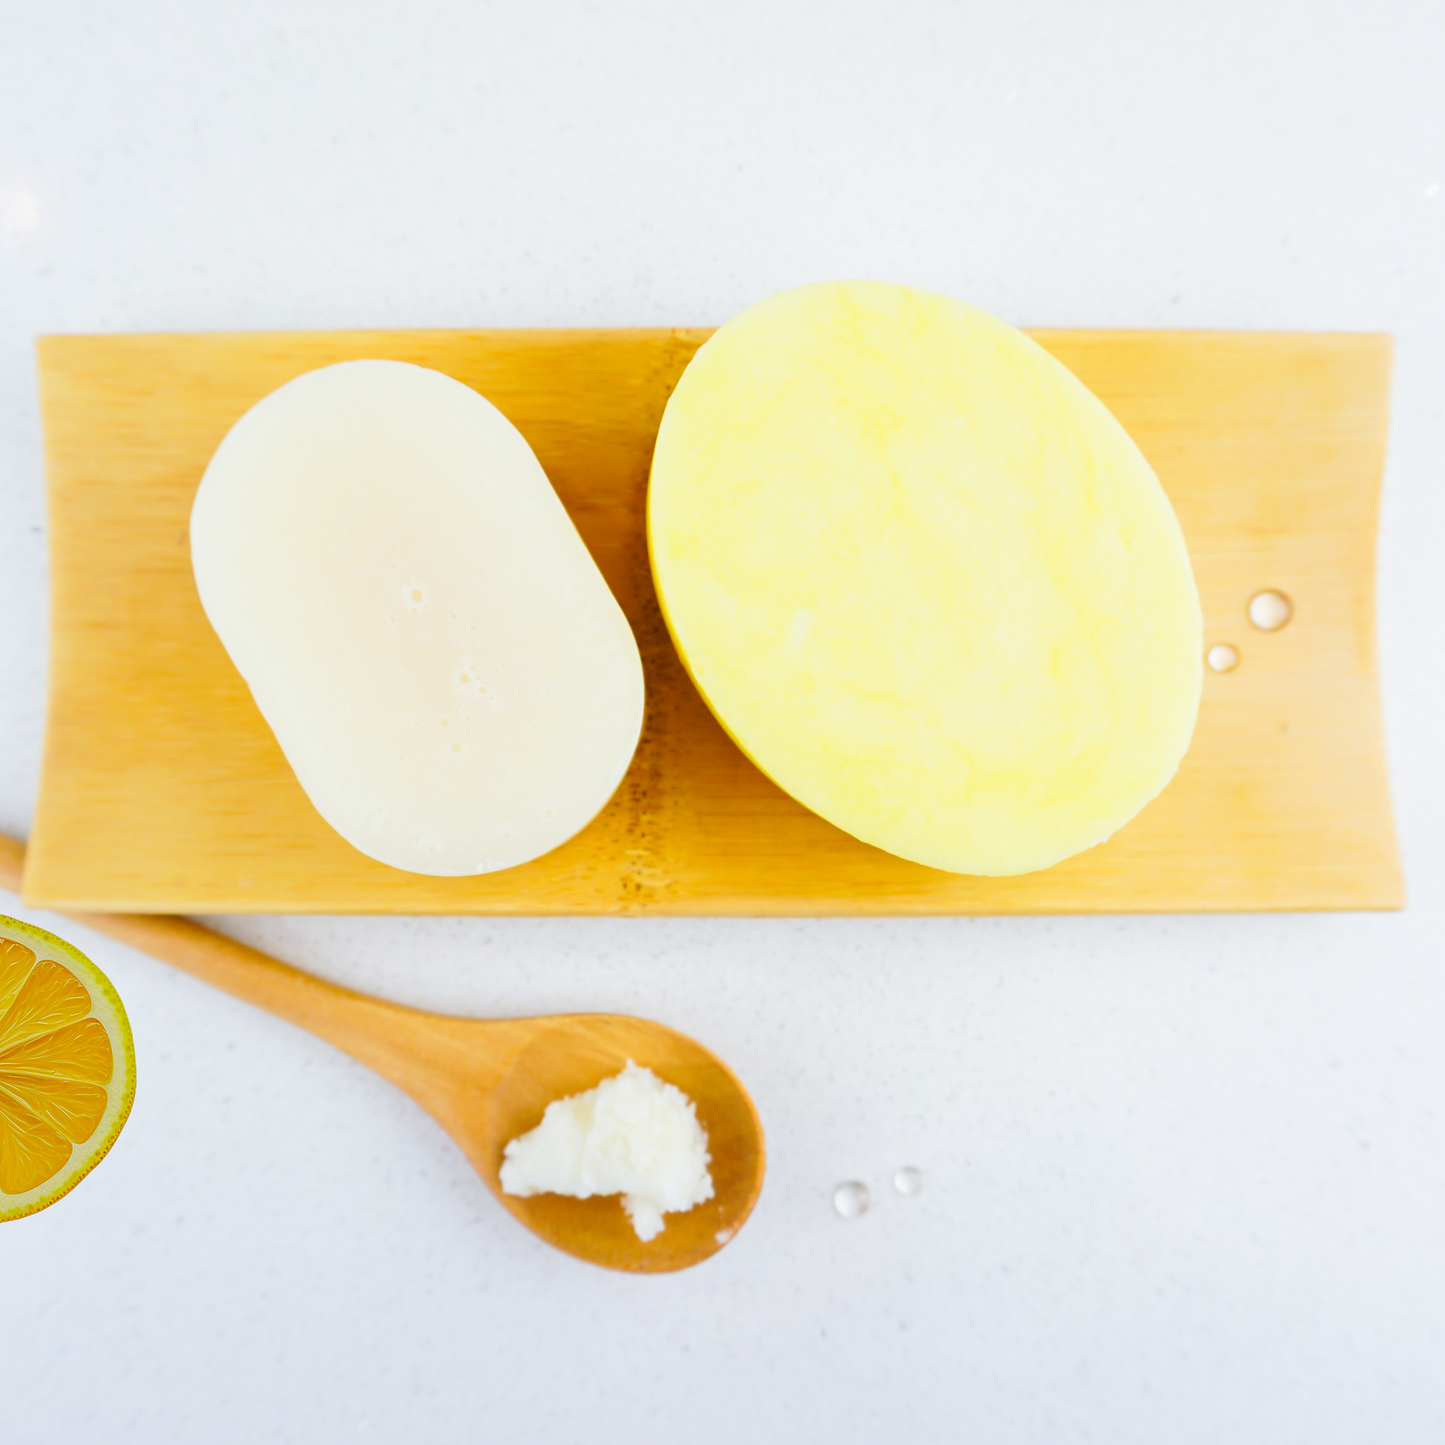 Lemon shampoo and conditioner bar sitting on bamboo tray with a slice of lemon